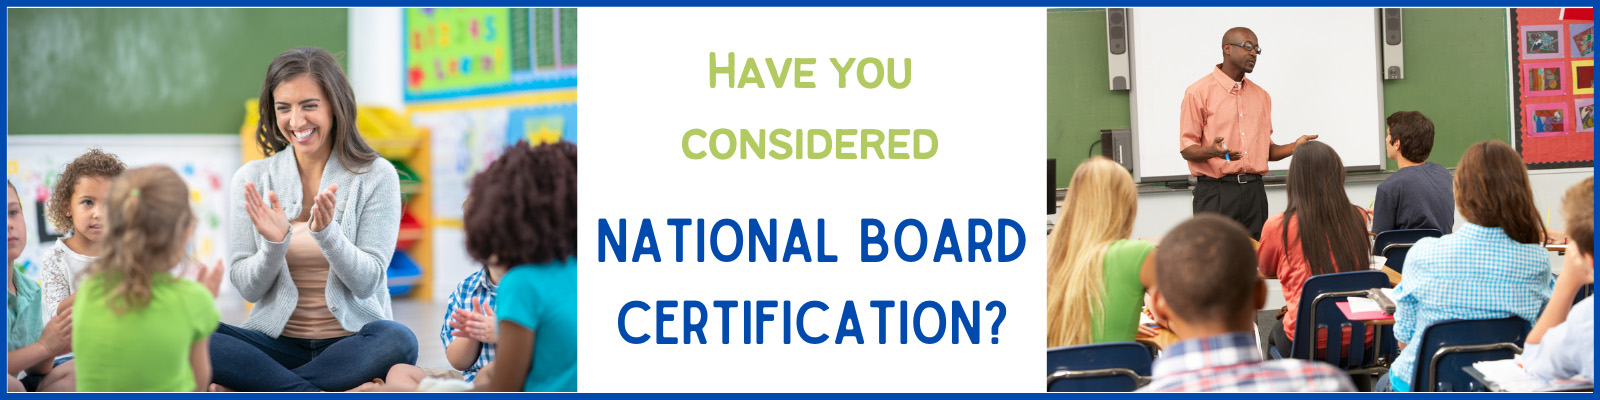 Have you considered National Board Certification?